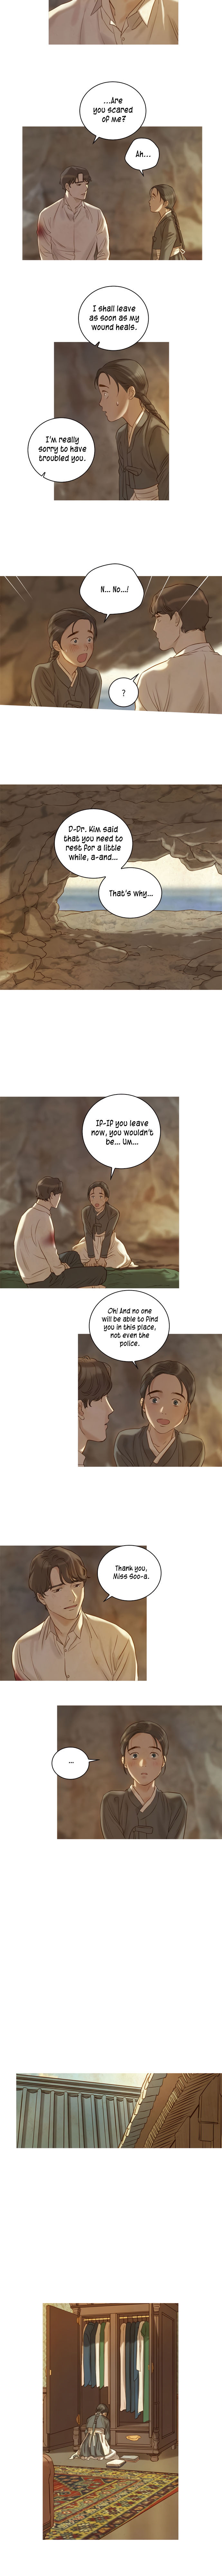 The Whale Star - The Gyeongseong Mermaid - Chapter 3 Page 7